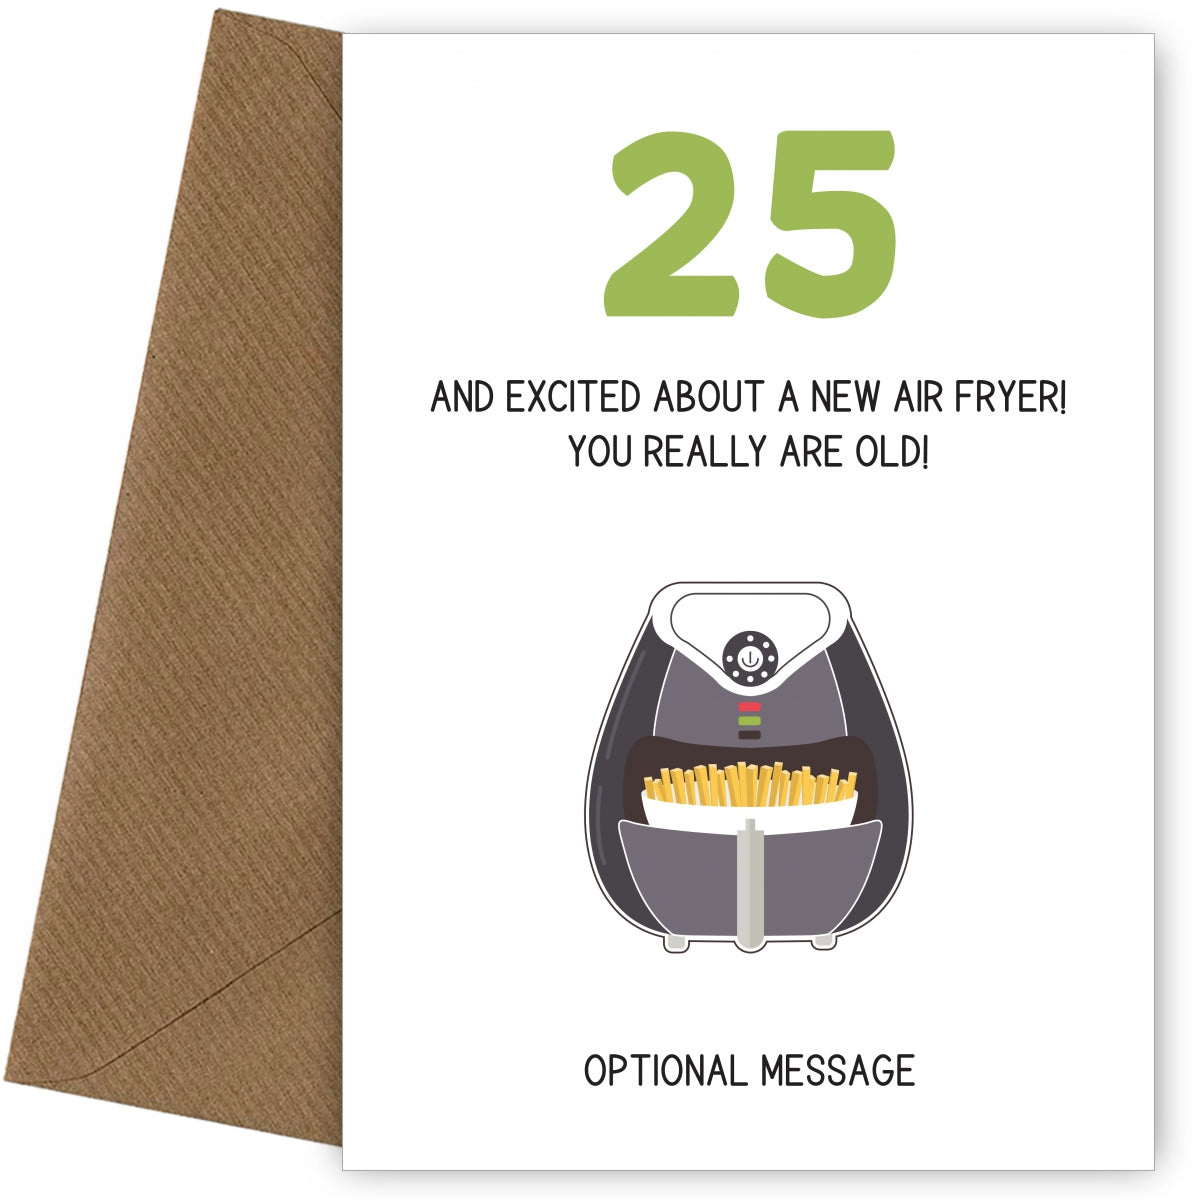 Happy 25th Birthday Card - Excited About an Air Fryer!